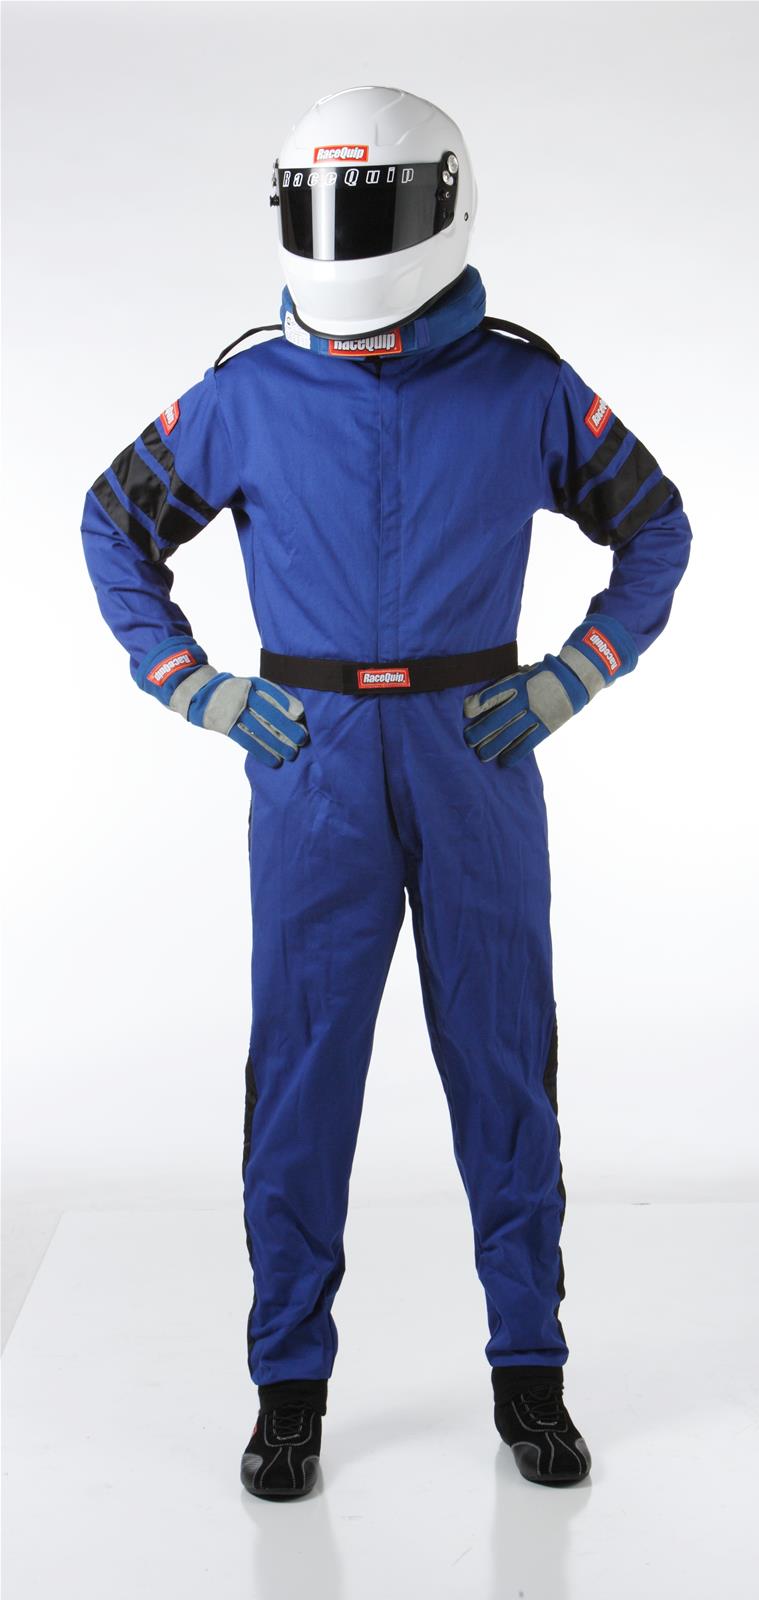 RaceQuip 110027 110 Series XX-Large Blue SFI 3.2A/1 Single Layer One-Piece Driving Suit